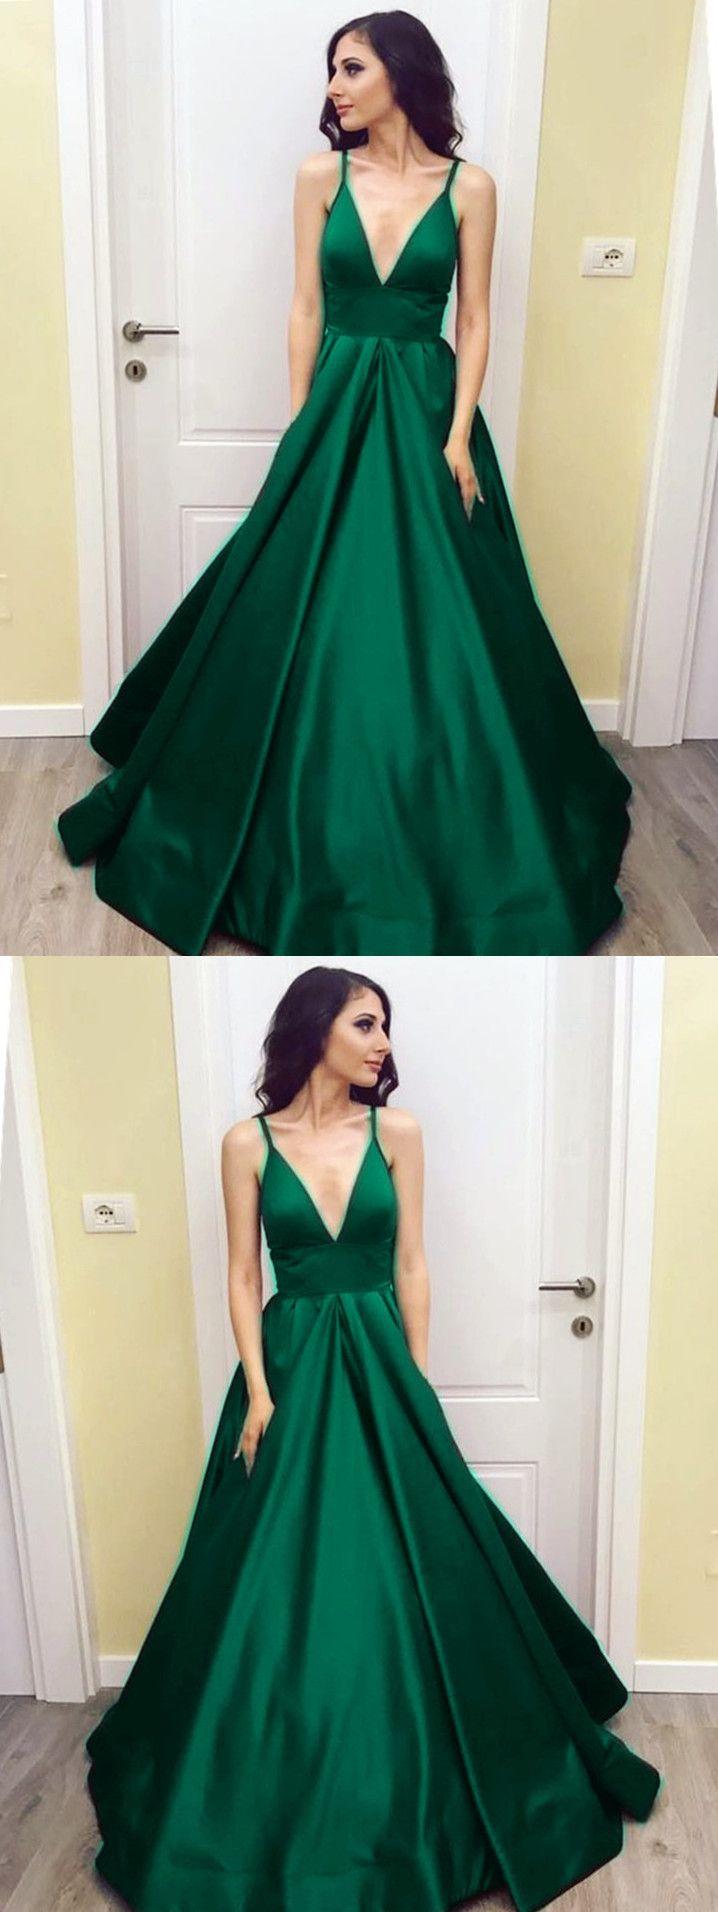 Wedding - Sexy Deep V Neck Long Satin Ball Gowns Prom Dresses 2018